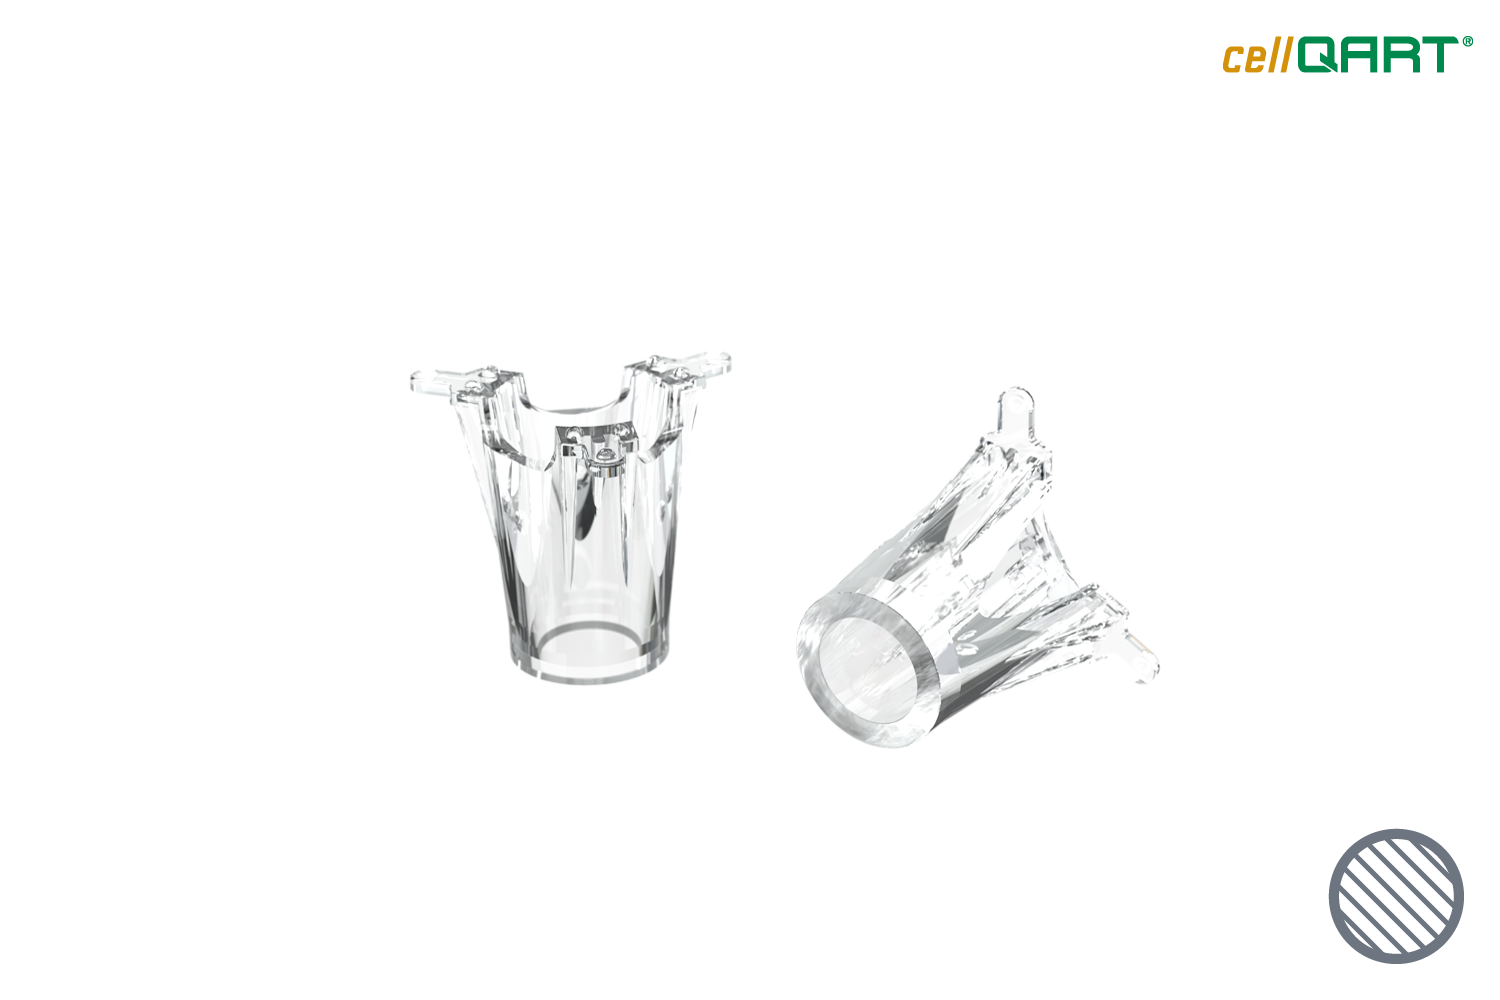 24-Well Insert 0.4 µm PET clear extended culture